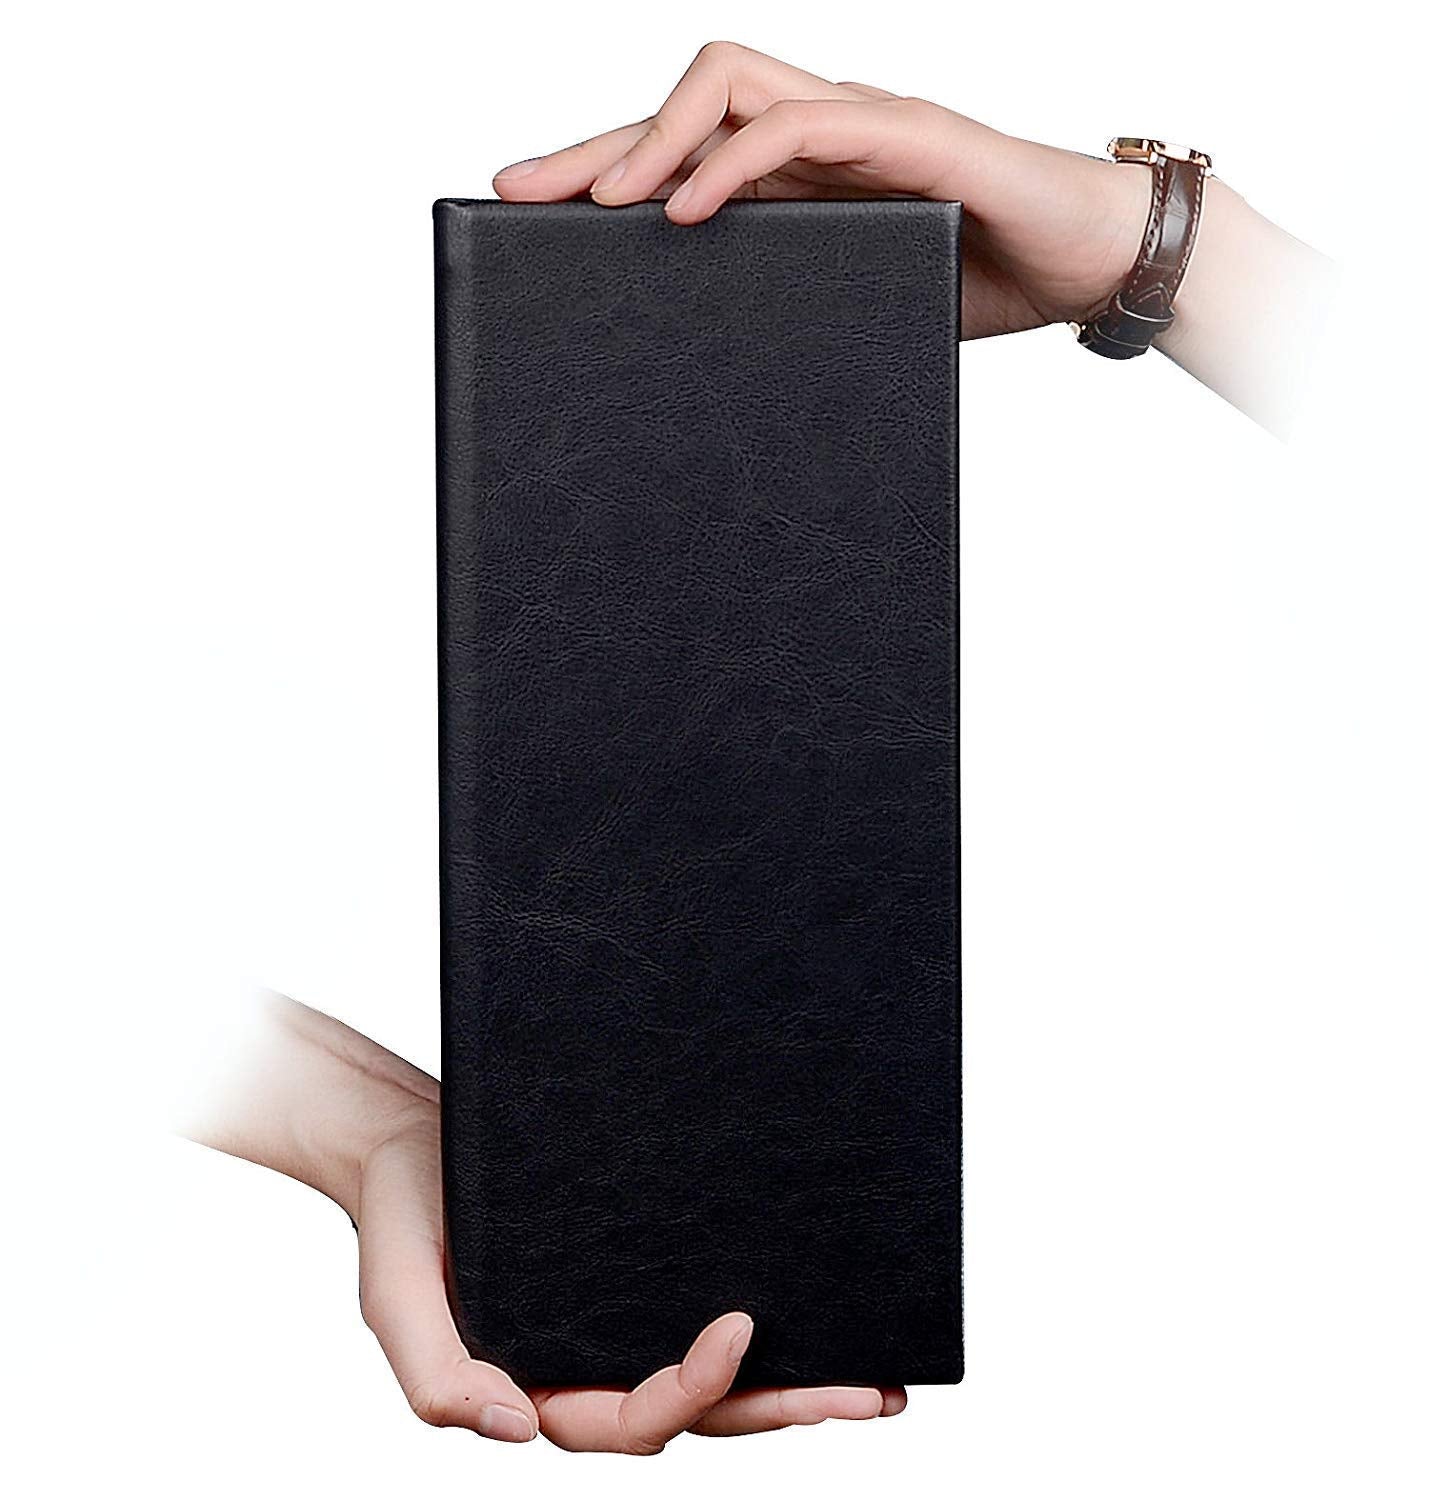 Rudra Exports Leather Book Style Double Fold Panel Menu Cover Folder, Binder Style Bar Cocktail Folder, Restaurant Menu Covers, Cocktail Menu Folder, Juice and Beverage Folder Black : 01 Pc.